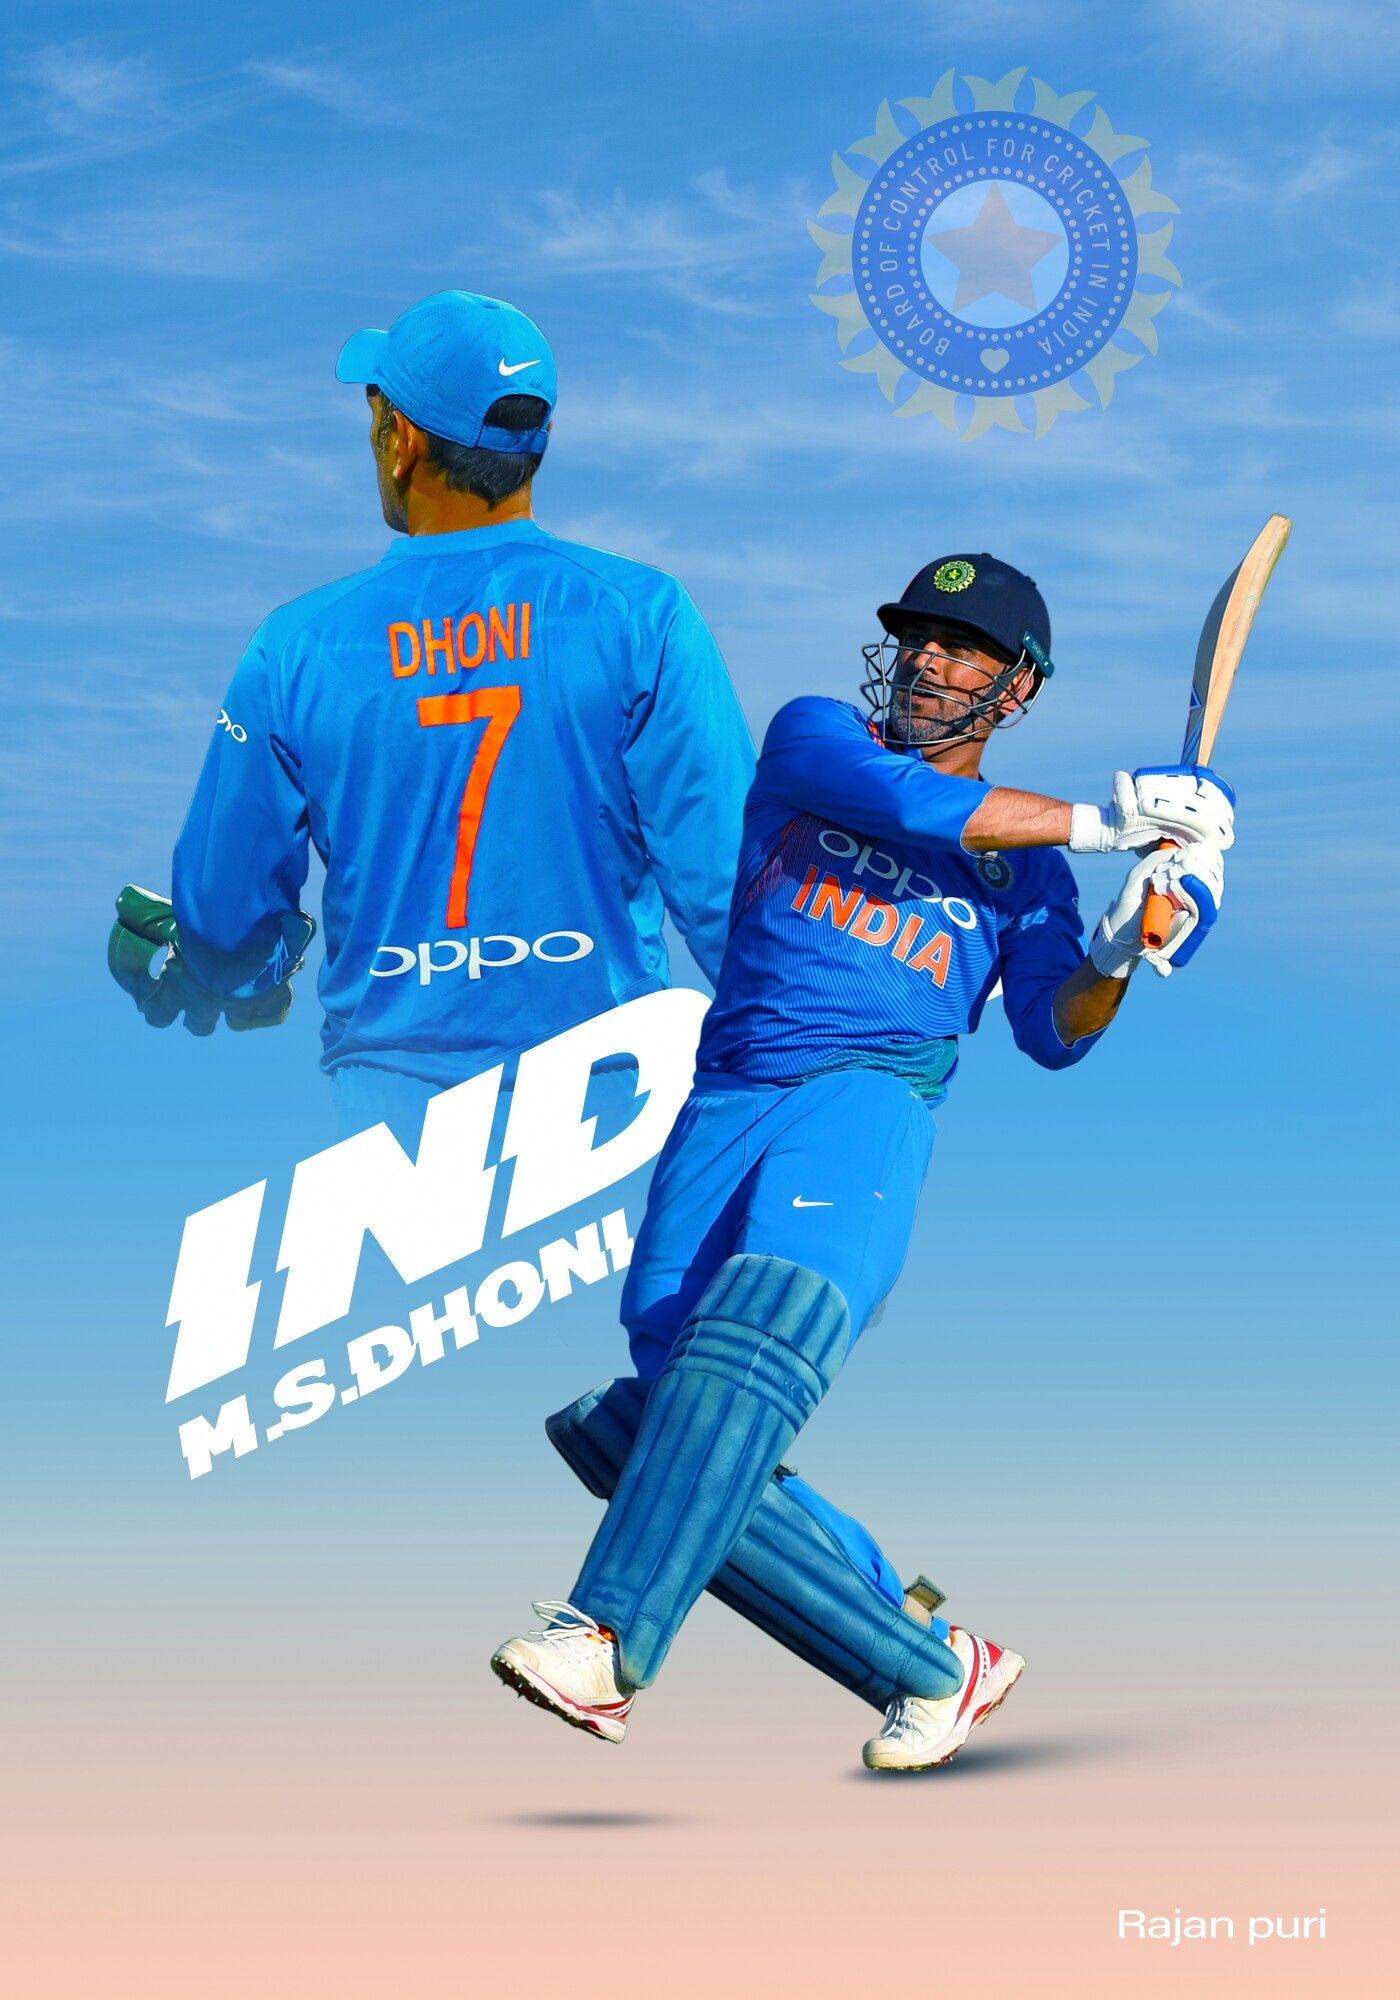 Ms Dhoni Phone Cover - 1400x2000 Wallpaper 